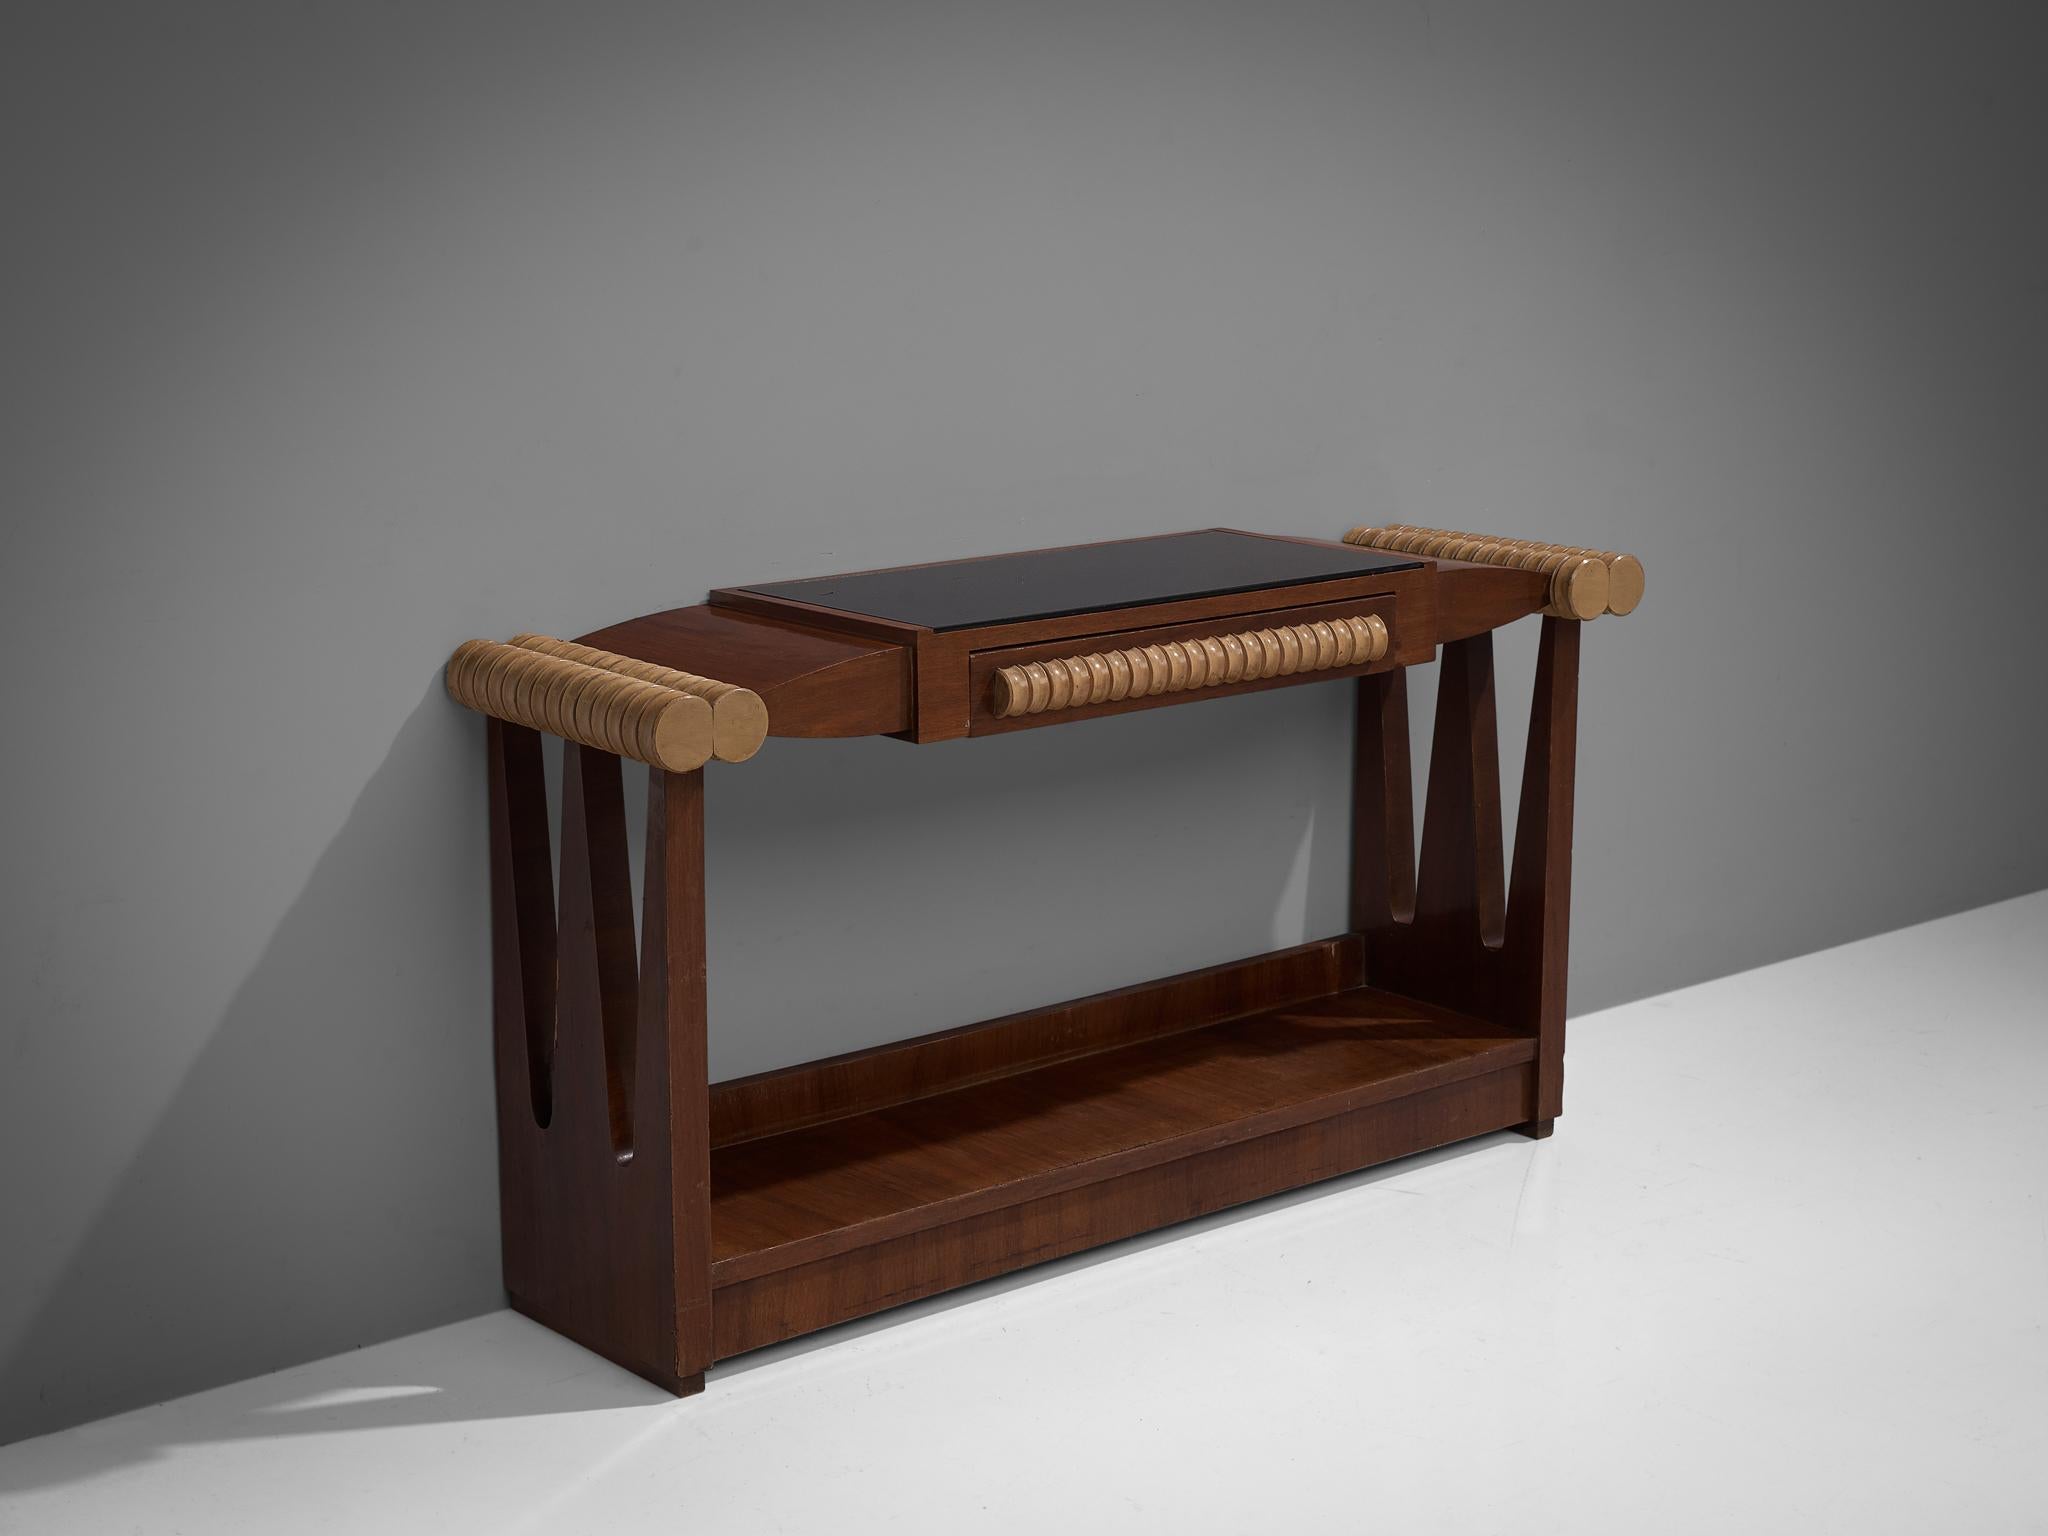 Console, maple, walnut and glass, Italy, 1940s

This Italian console has been manufactured in walnut, with contrasting sculptural elements in maple. These highly decorative elements in maple function as a handle for the shallow drawer in the